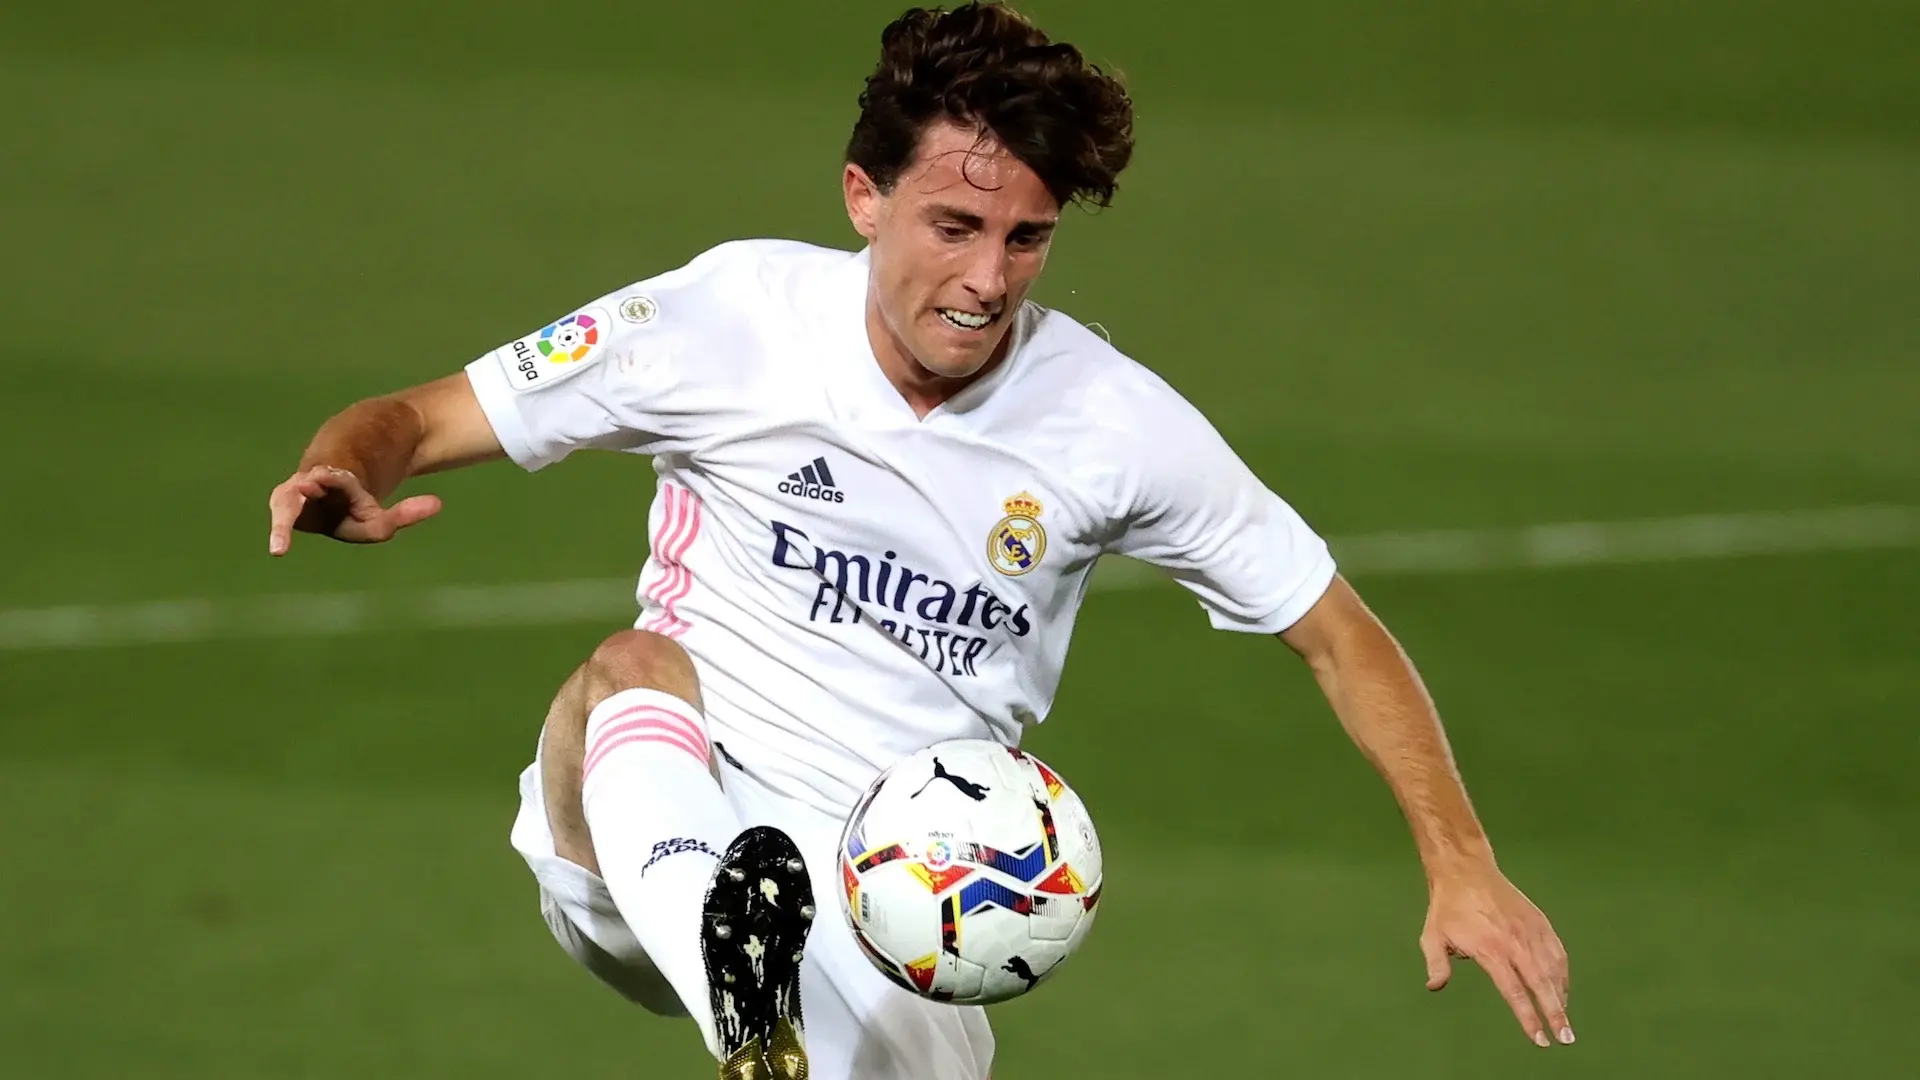 The Royal Society sets a date for the new assault by Odriozola
